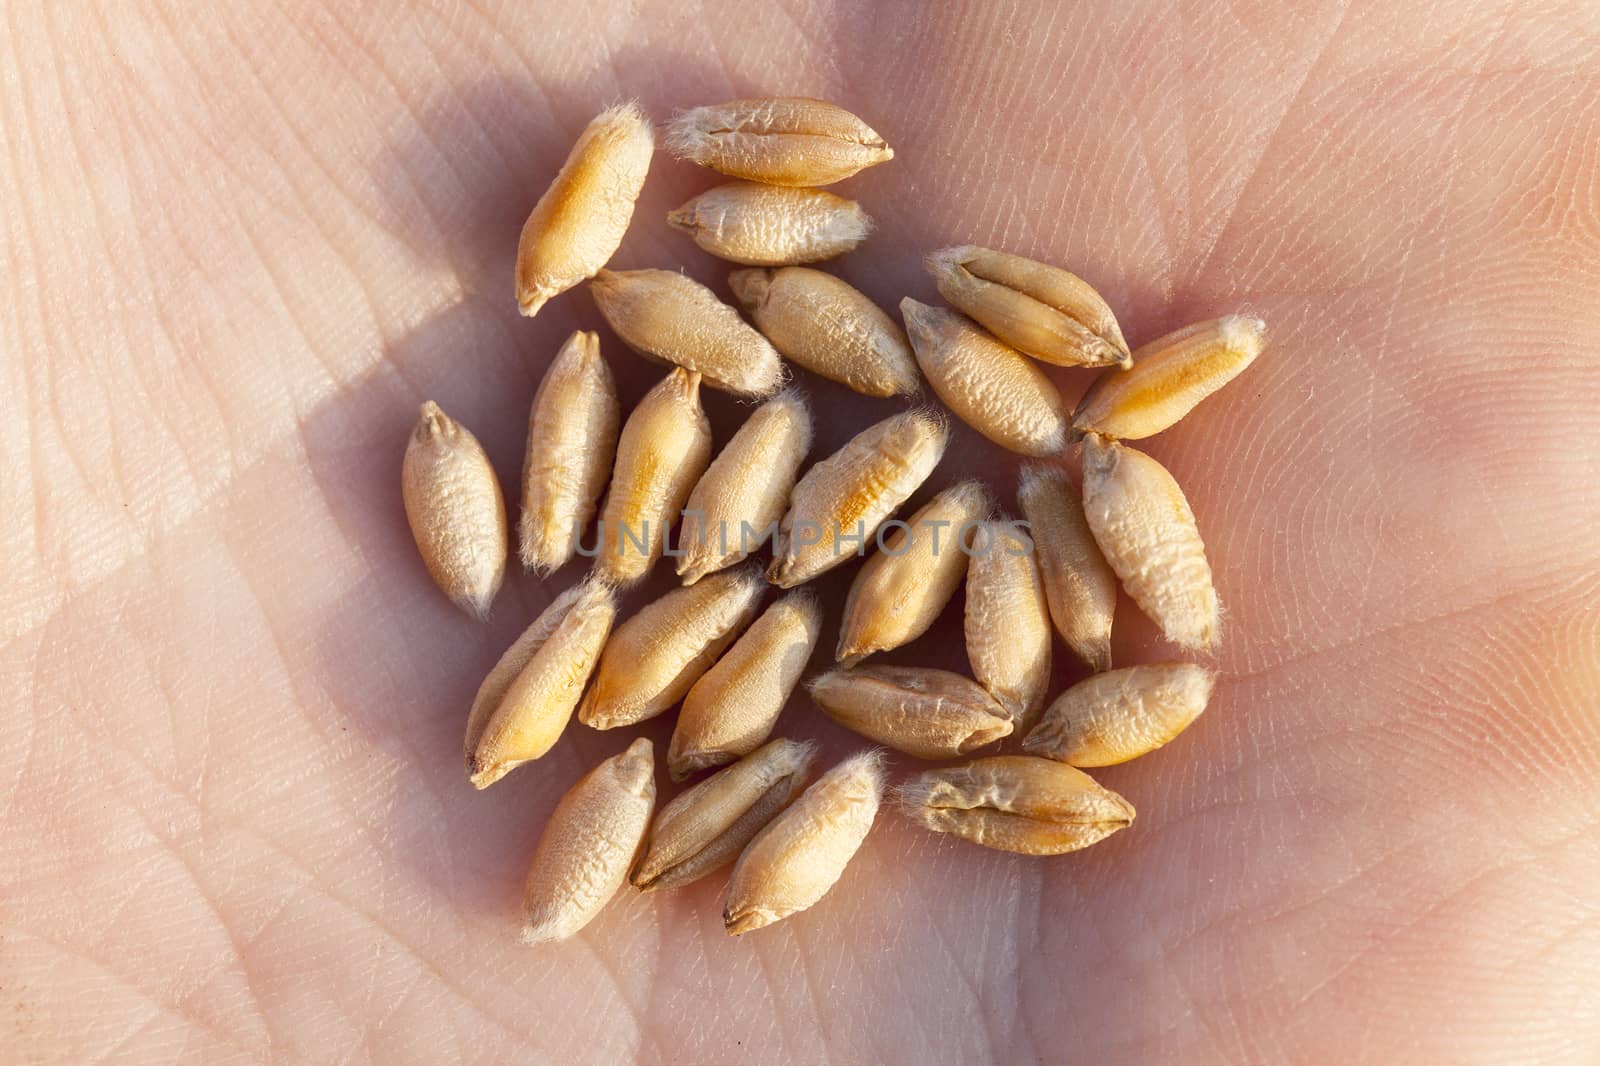 photographed close-up of wheat grain in a man's hand, after the harvest of cereals